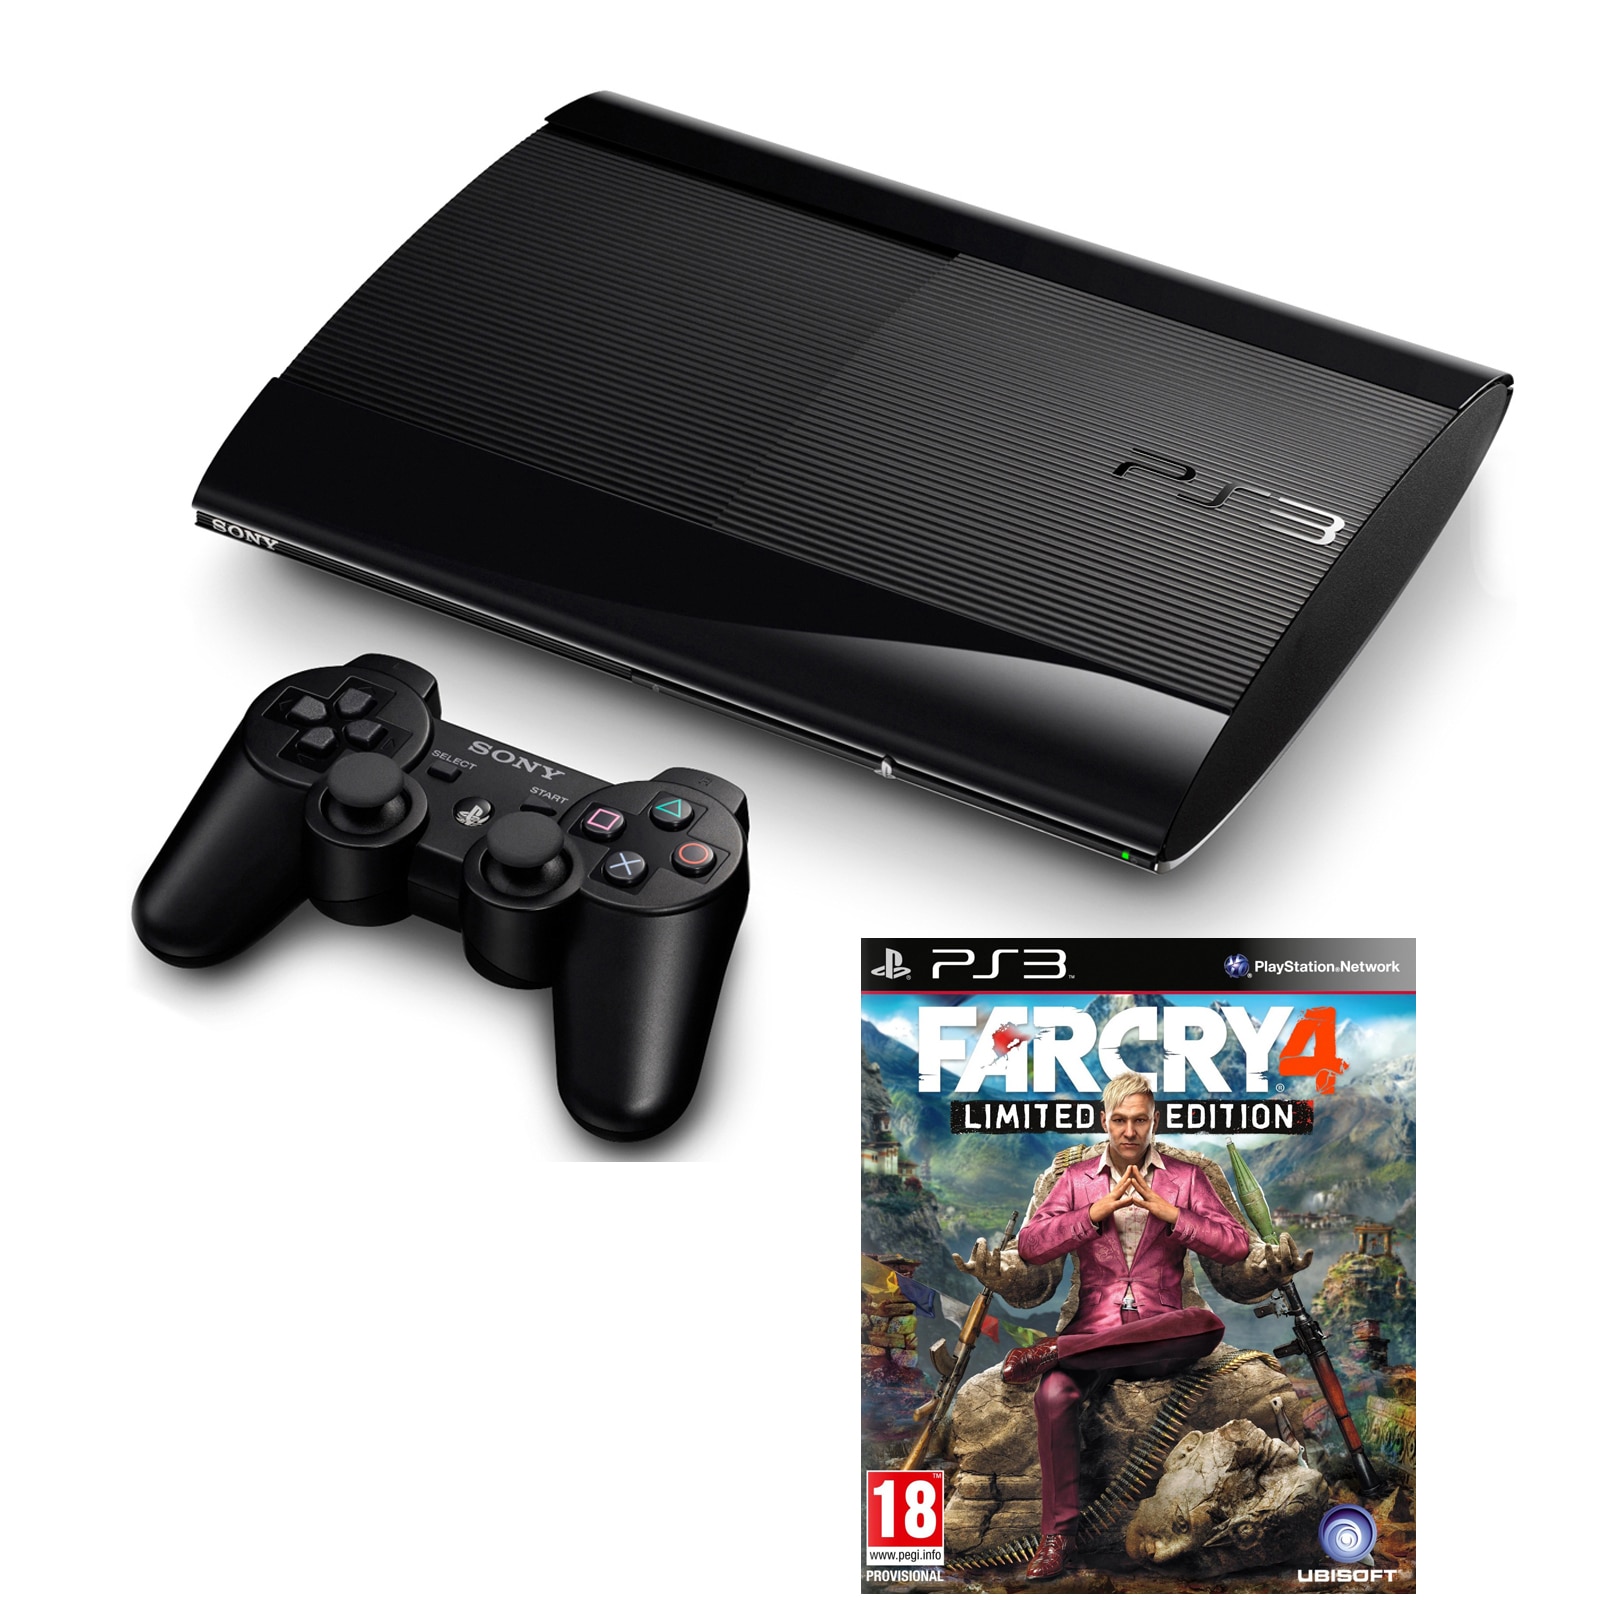 The owner Purchase Adult Consola Sony Playstation 3 Slim 500 GB + Joc Far Cry 4 - eMAG.ro